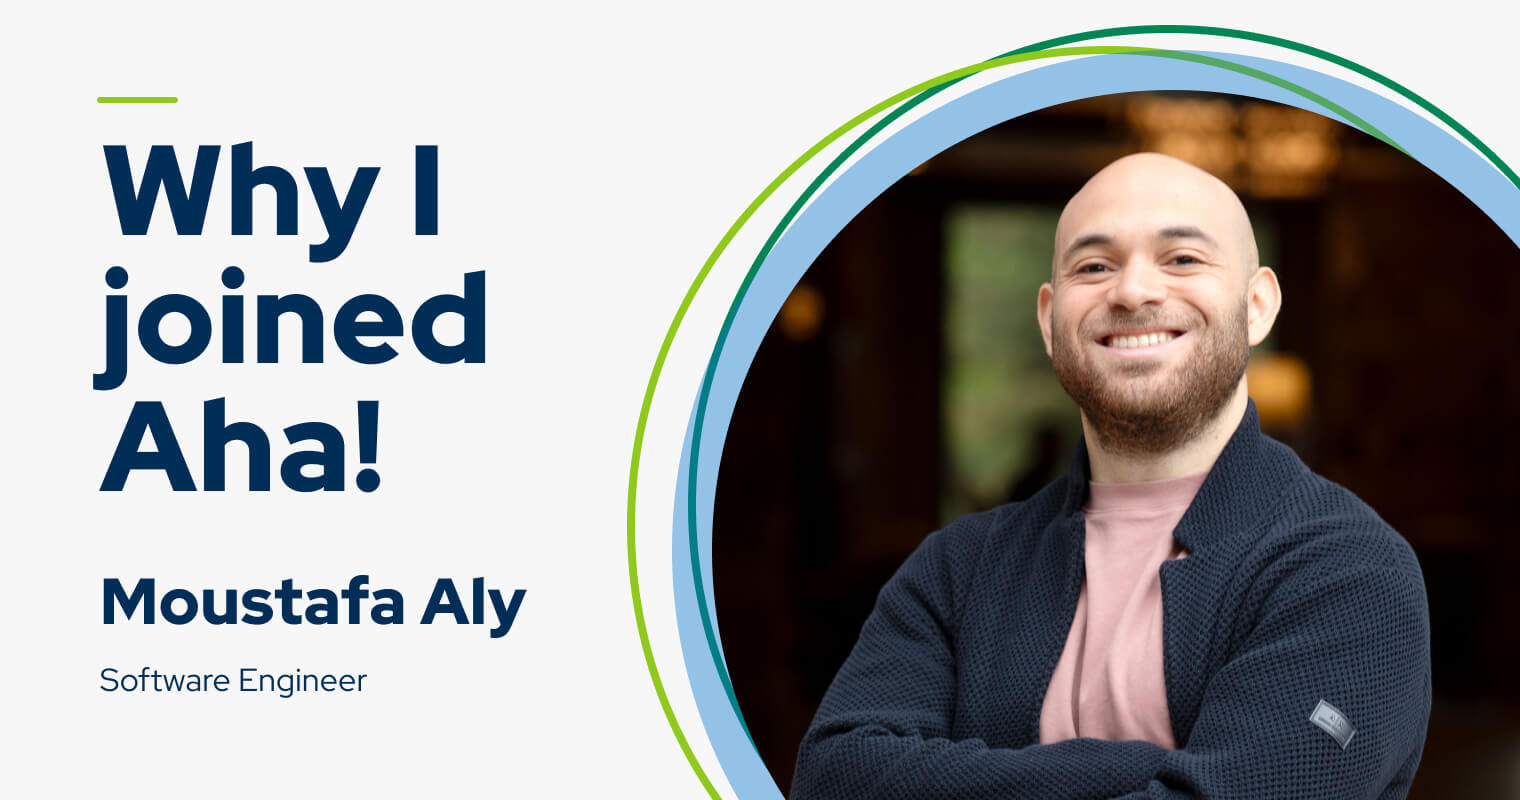 My name is Moustafa Aly — this is why I joined Aha!